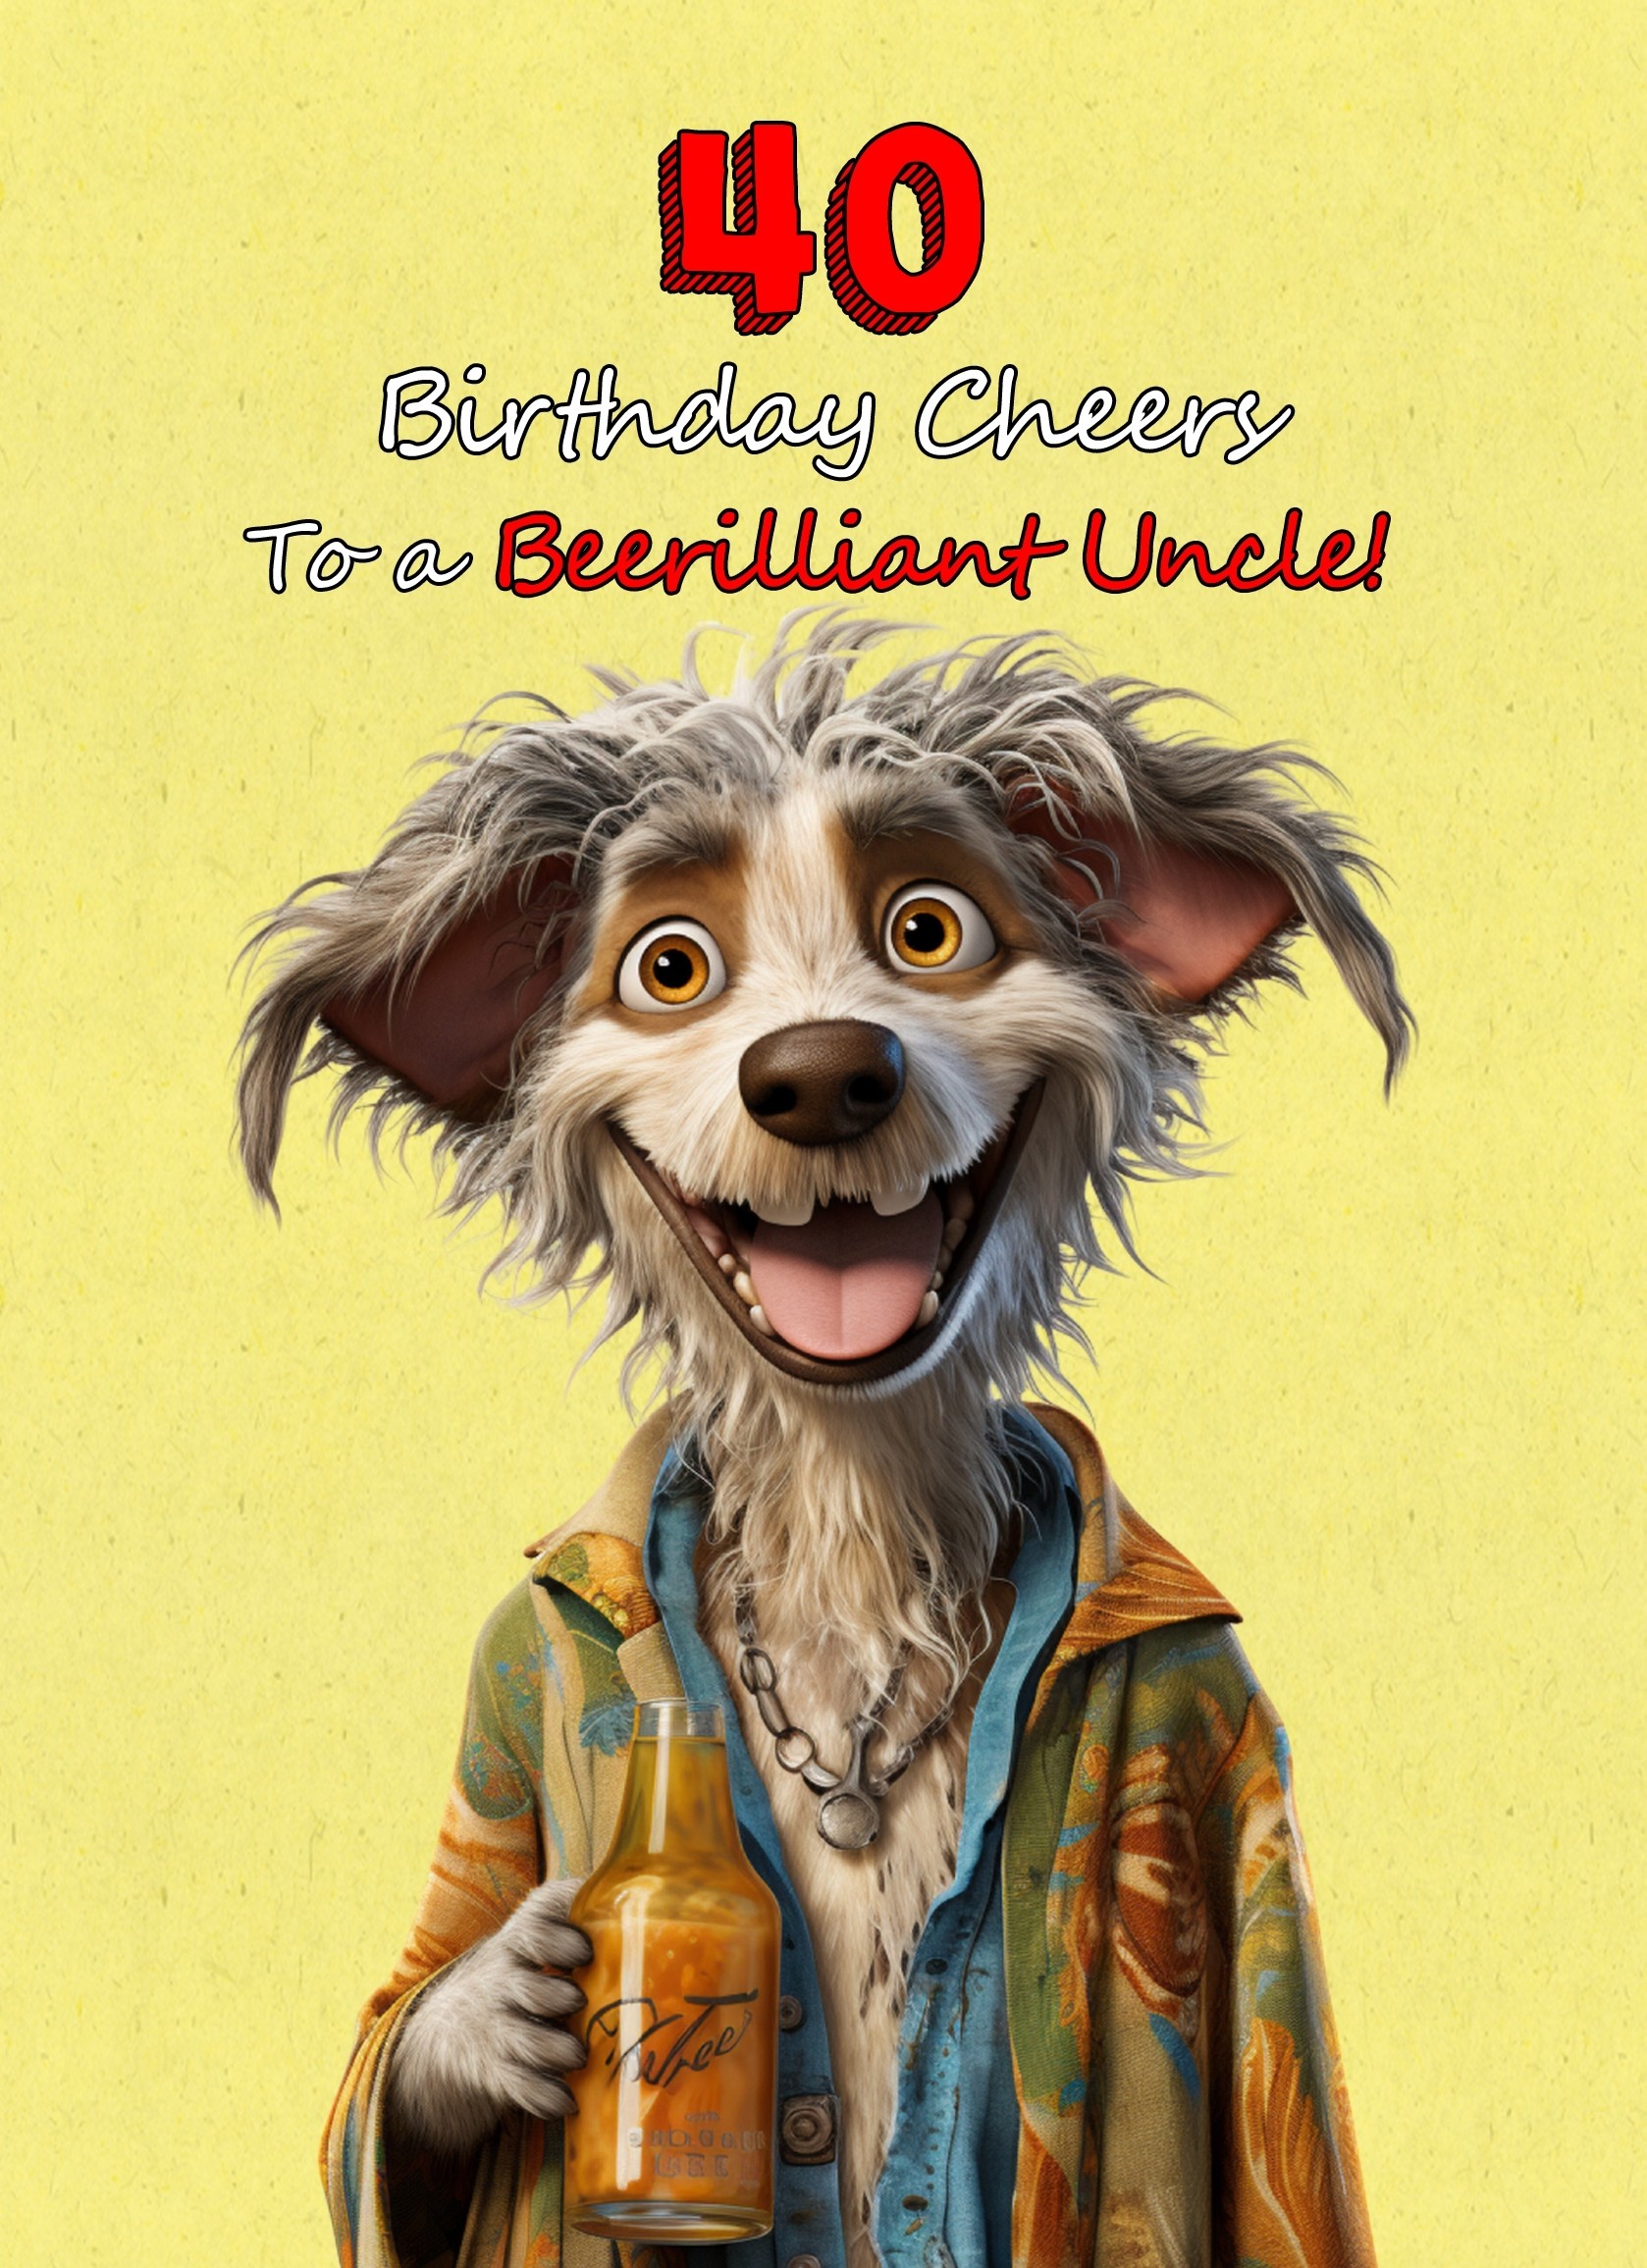 Uncle 40th Birthday Card (Funny Beerilliant Birthday Cheers, Design 2)